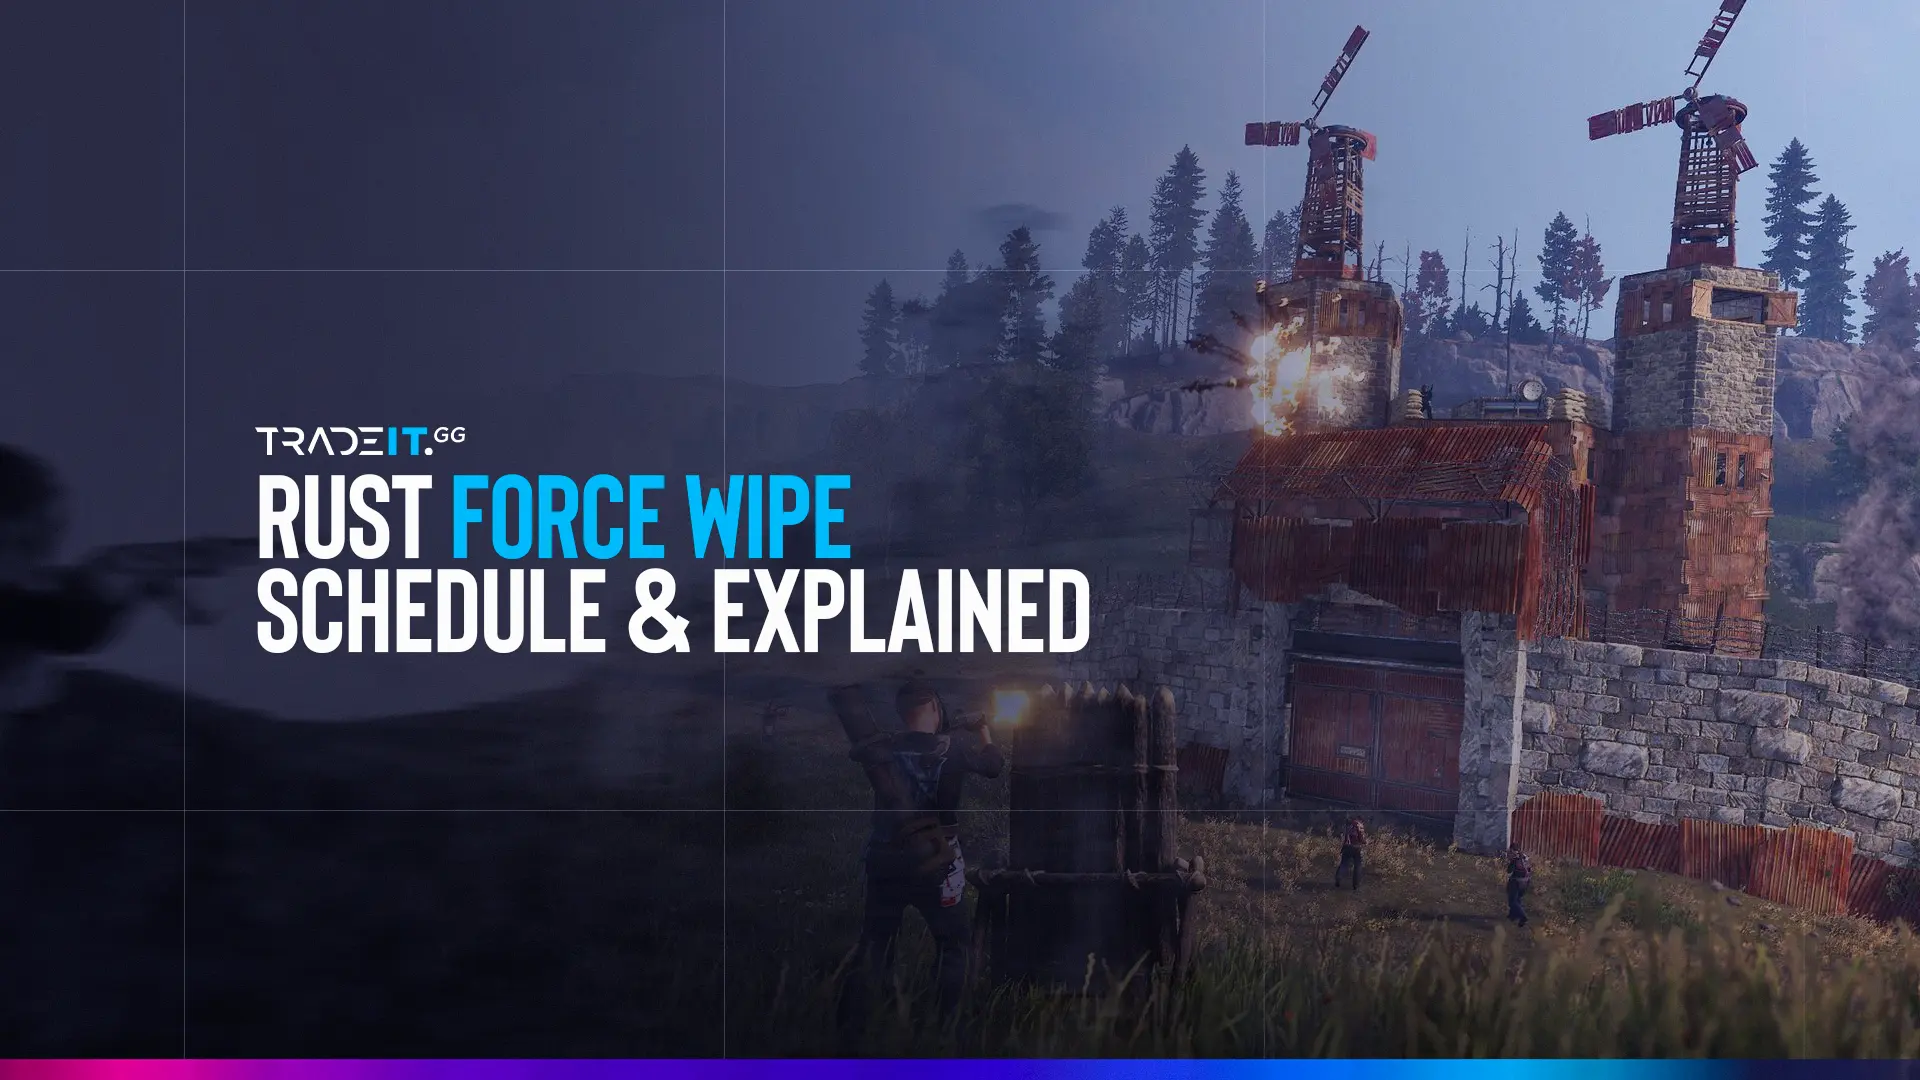 Rust Force Wipe Schedule Dates, Times & BP Wipes Explained